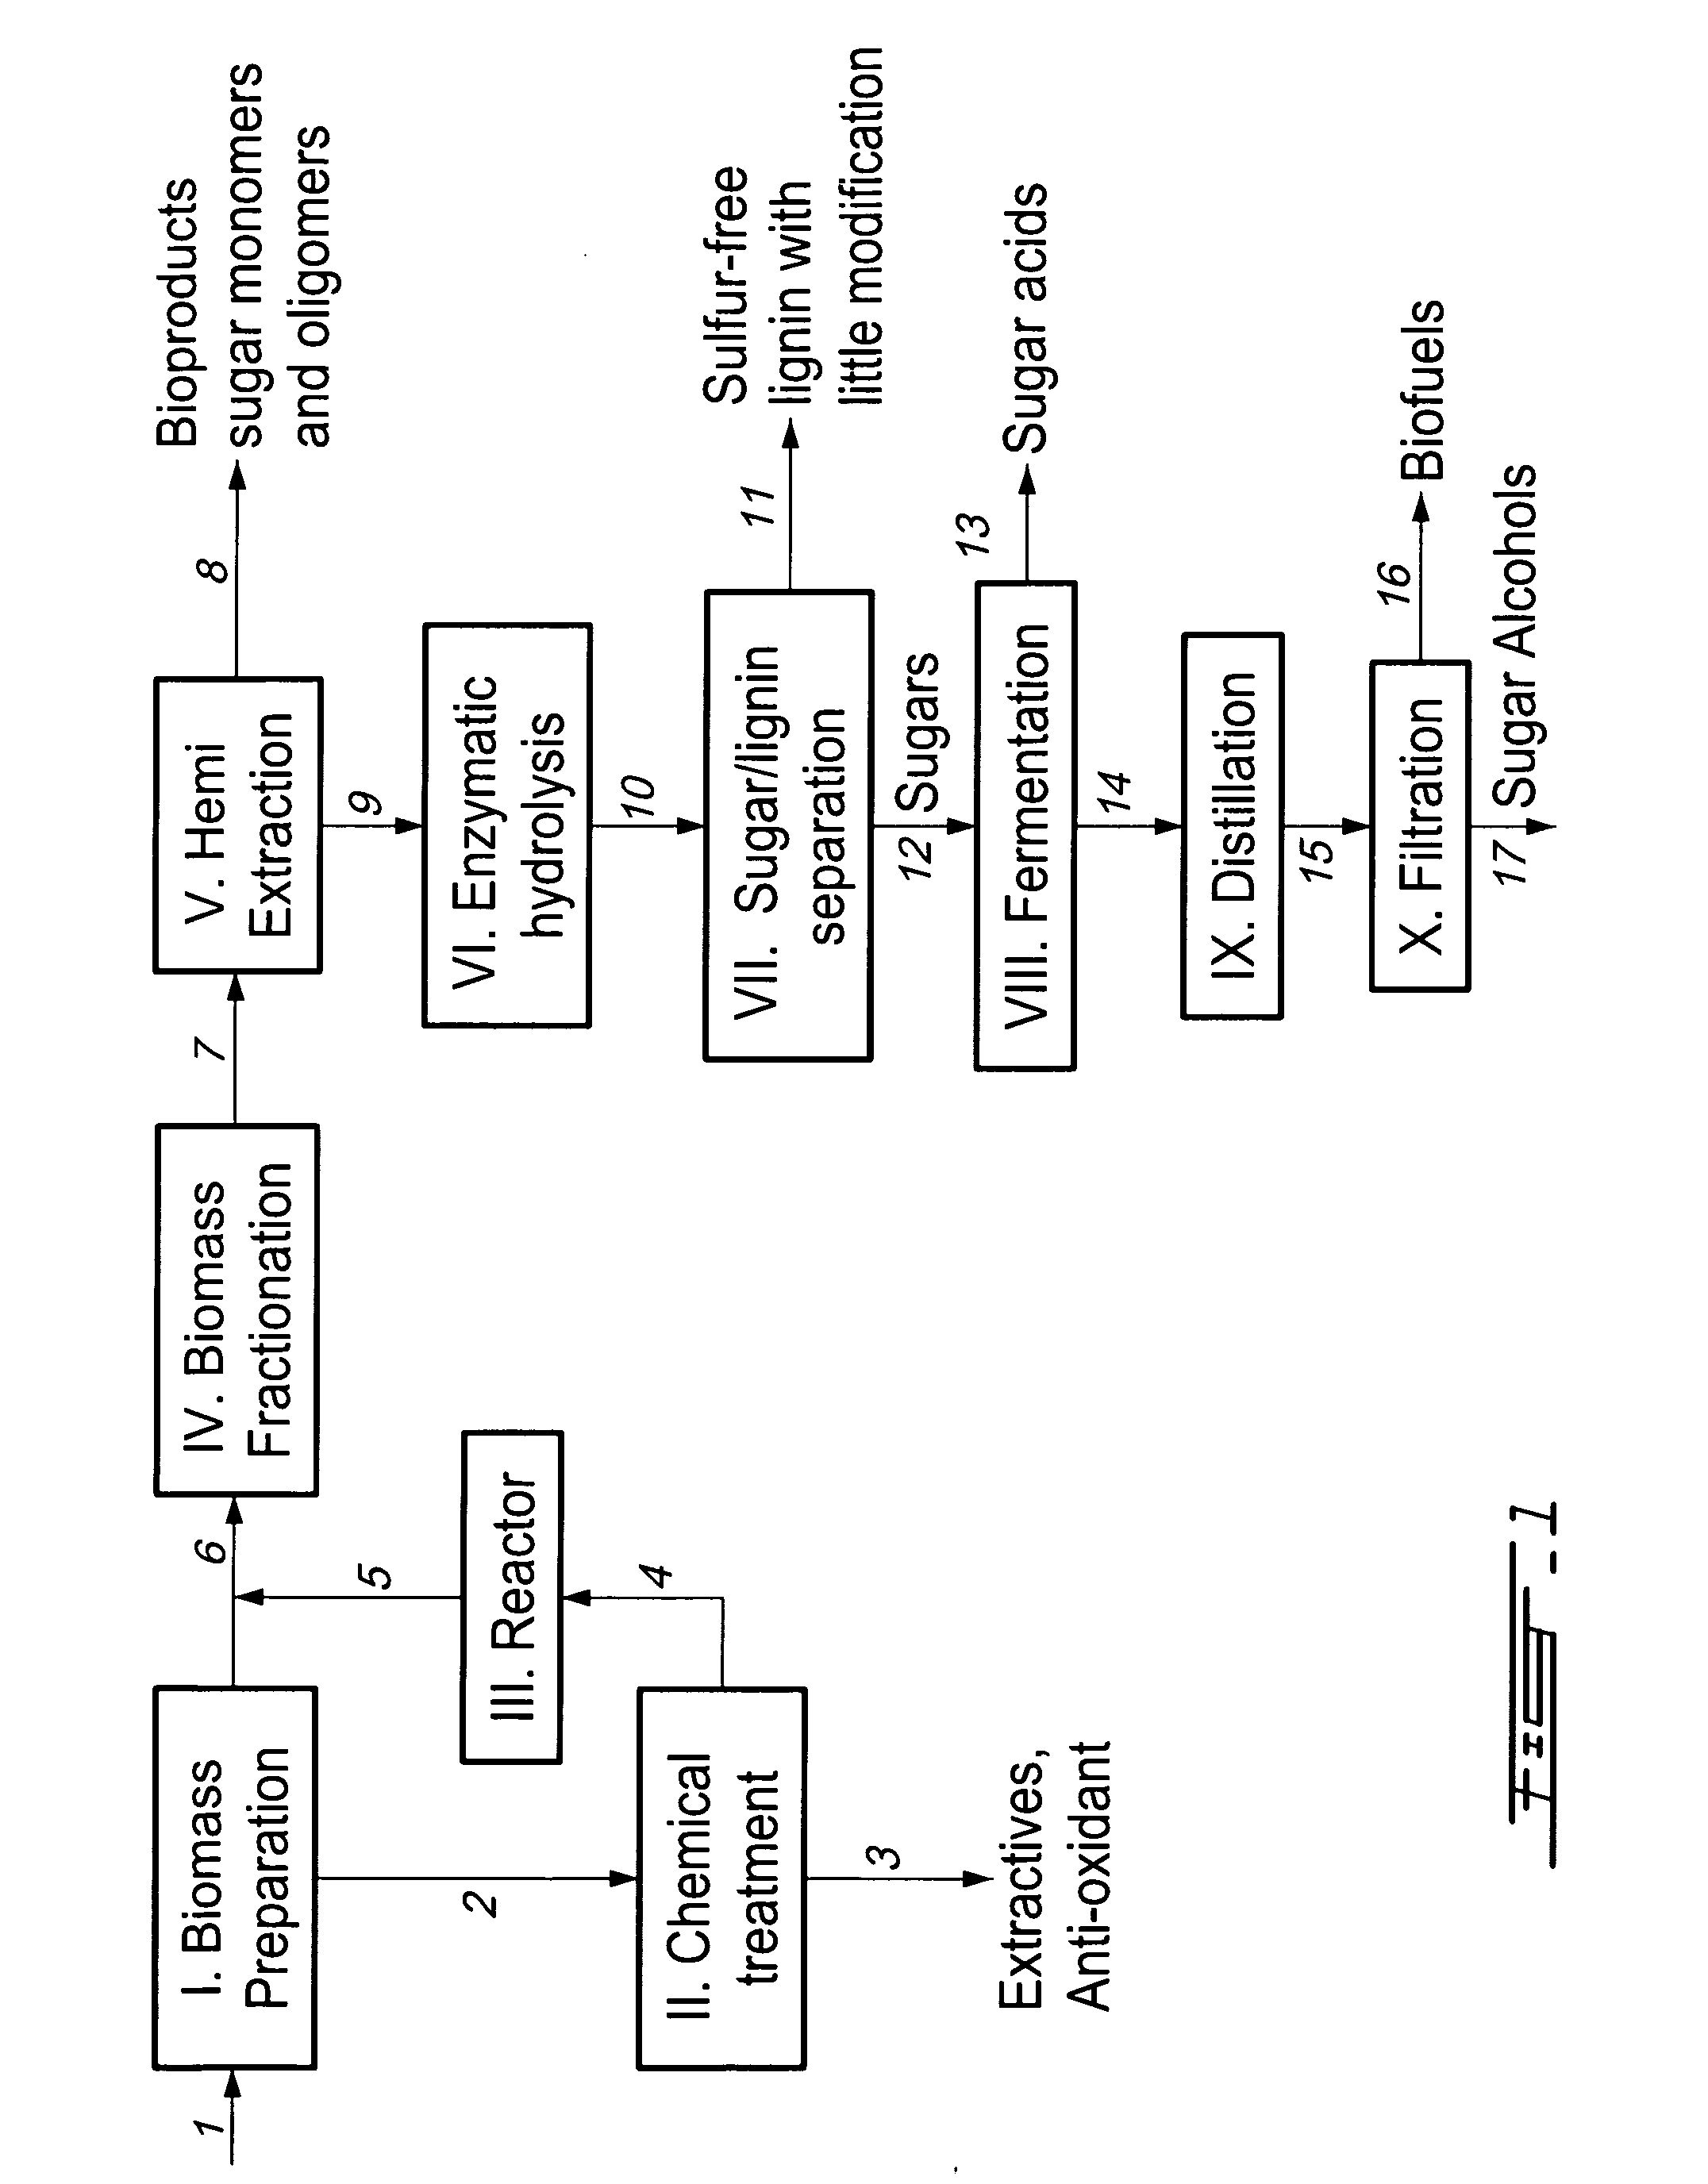 Biomass fractionation process for bioproducts